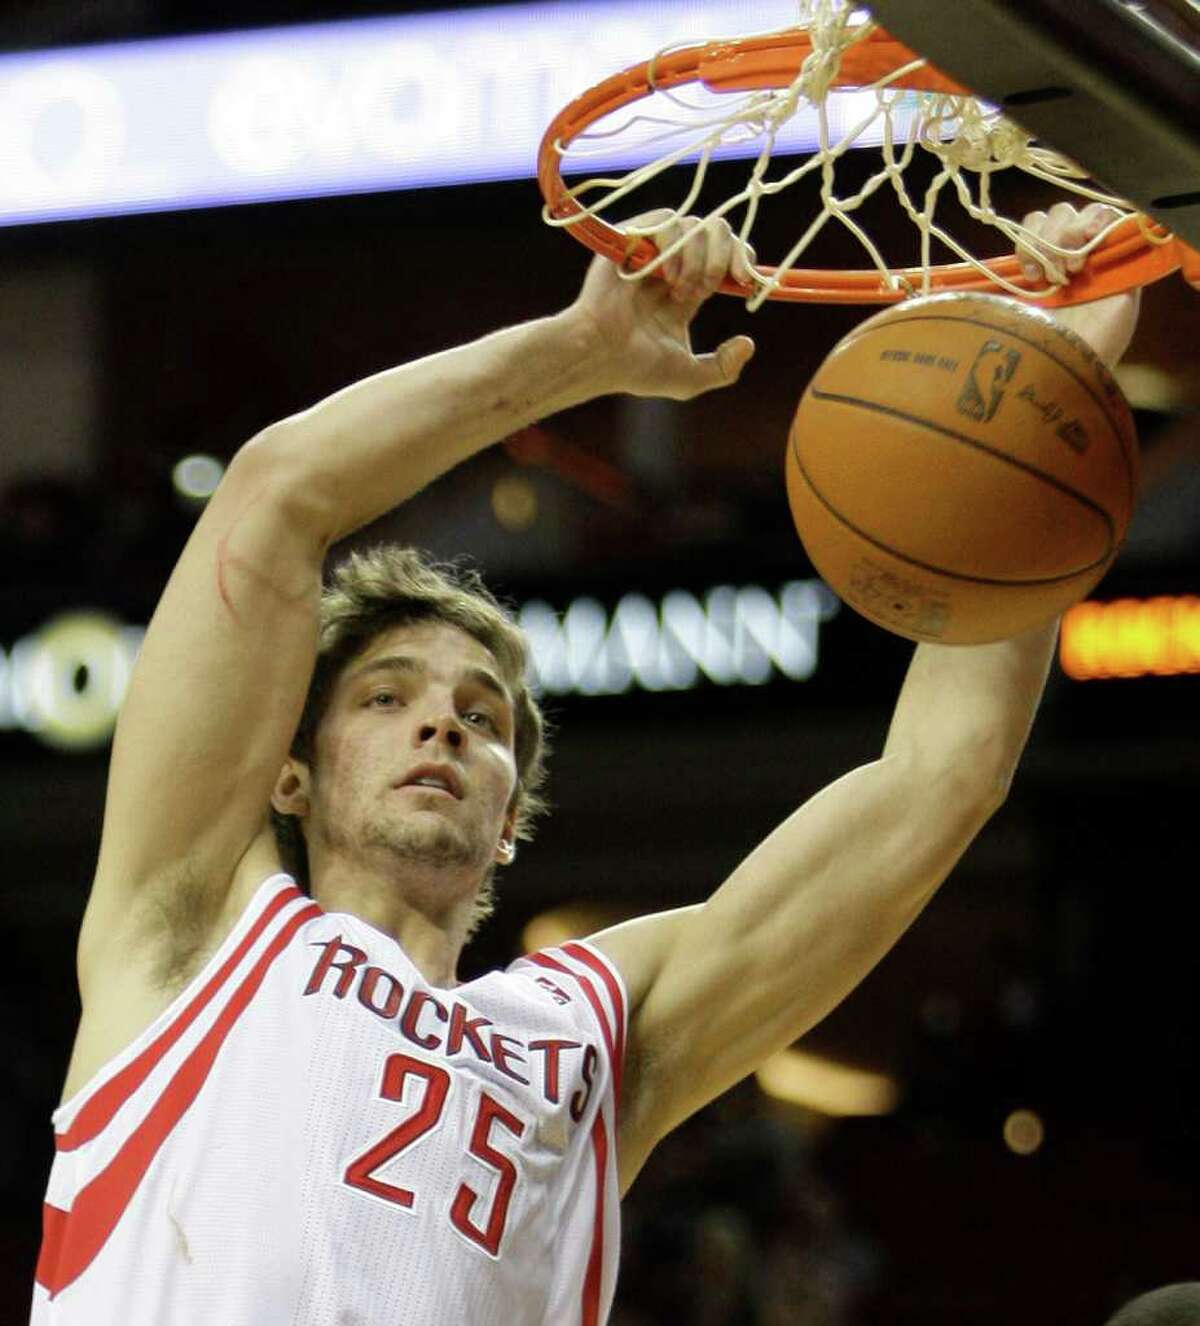 Houston Rockets' Chandler Parsons dunks the ball against the Detroit Pistons' during NBA game at Toyota Center Tuesday, Jan. 17, 2012, in Houston.